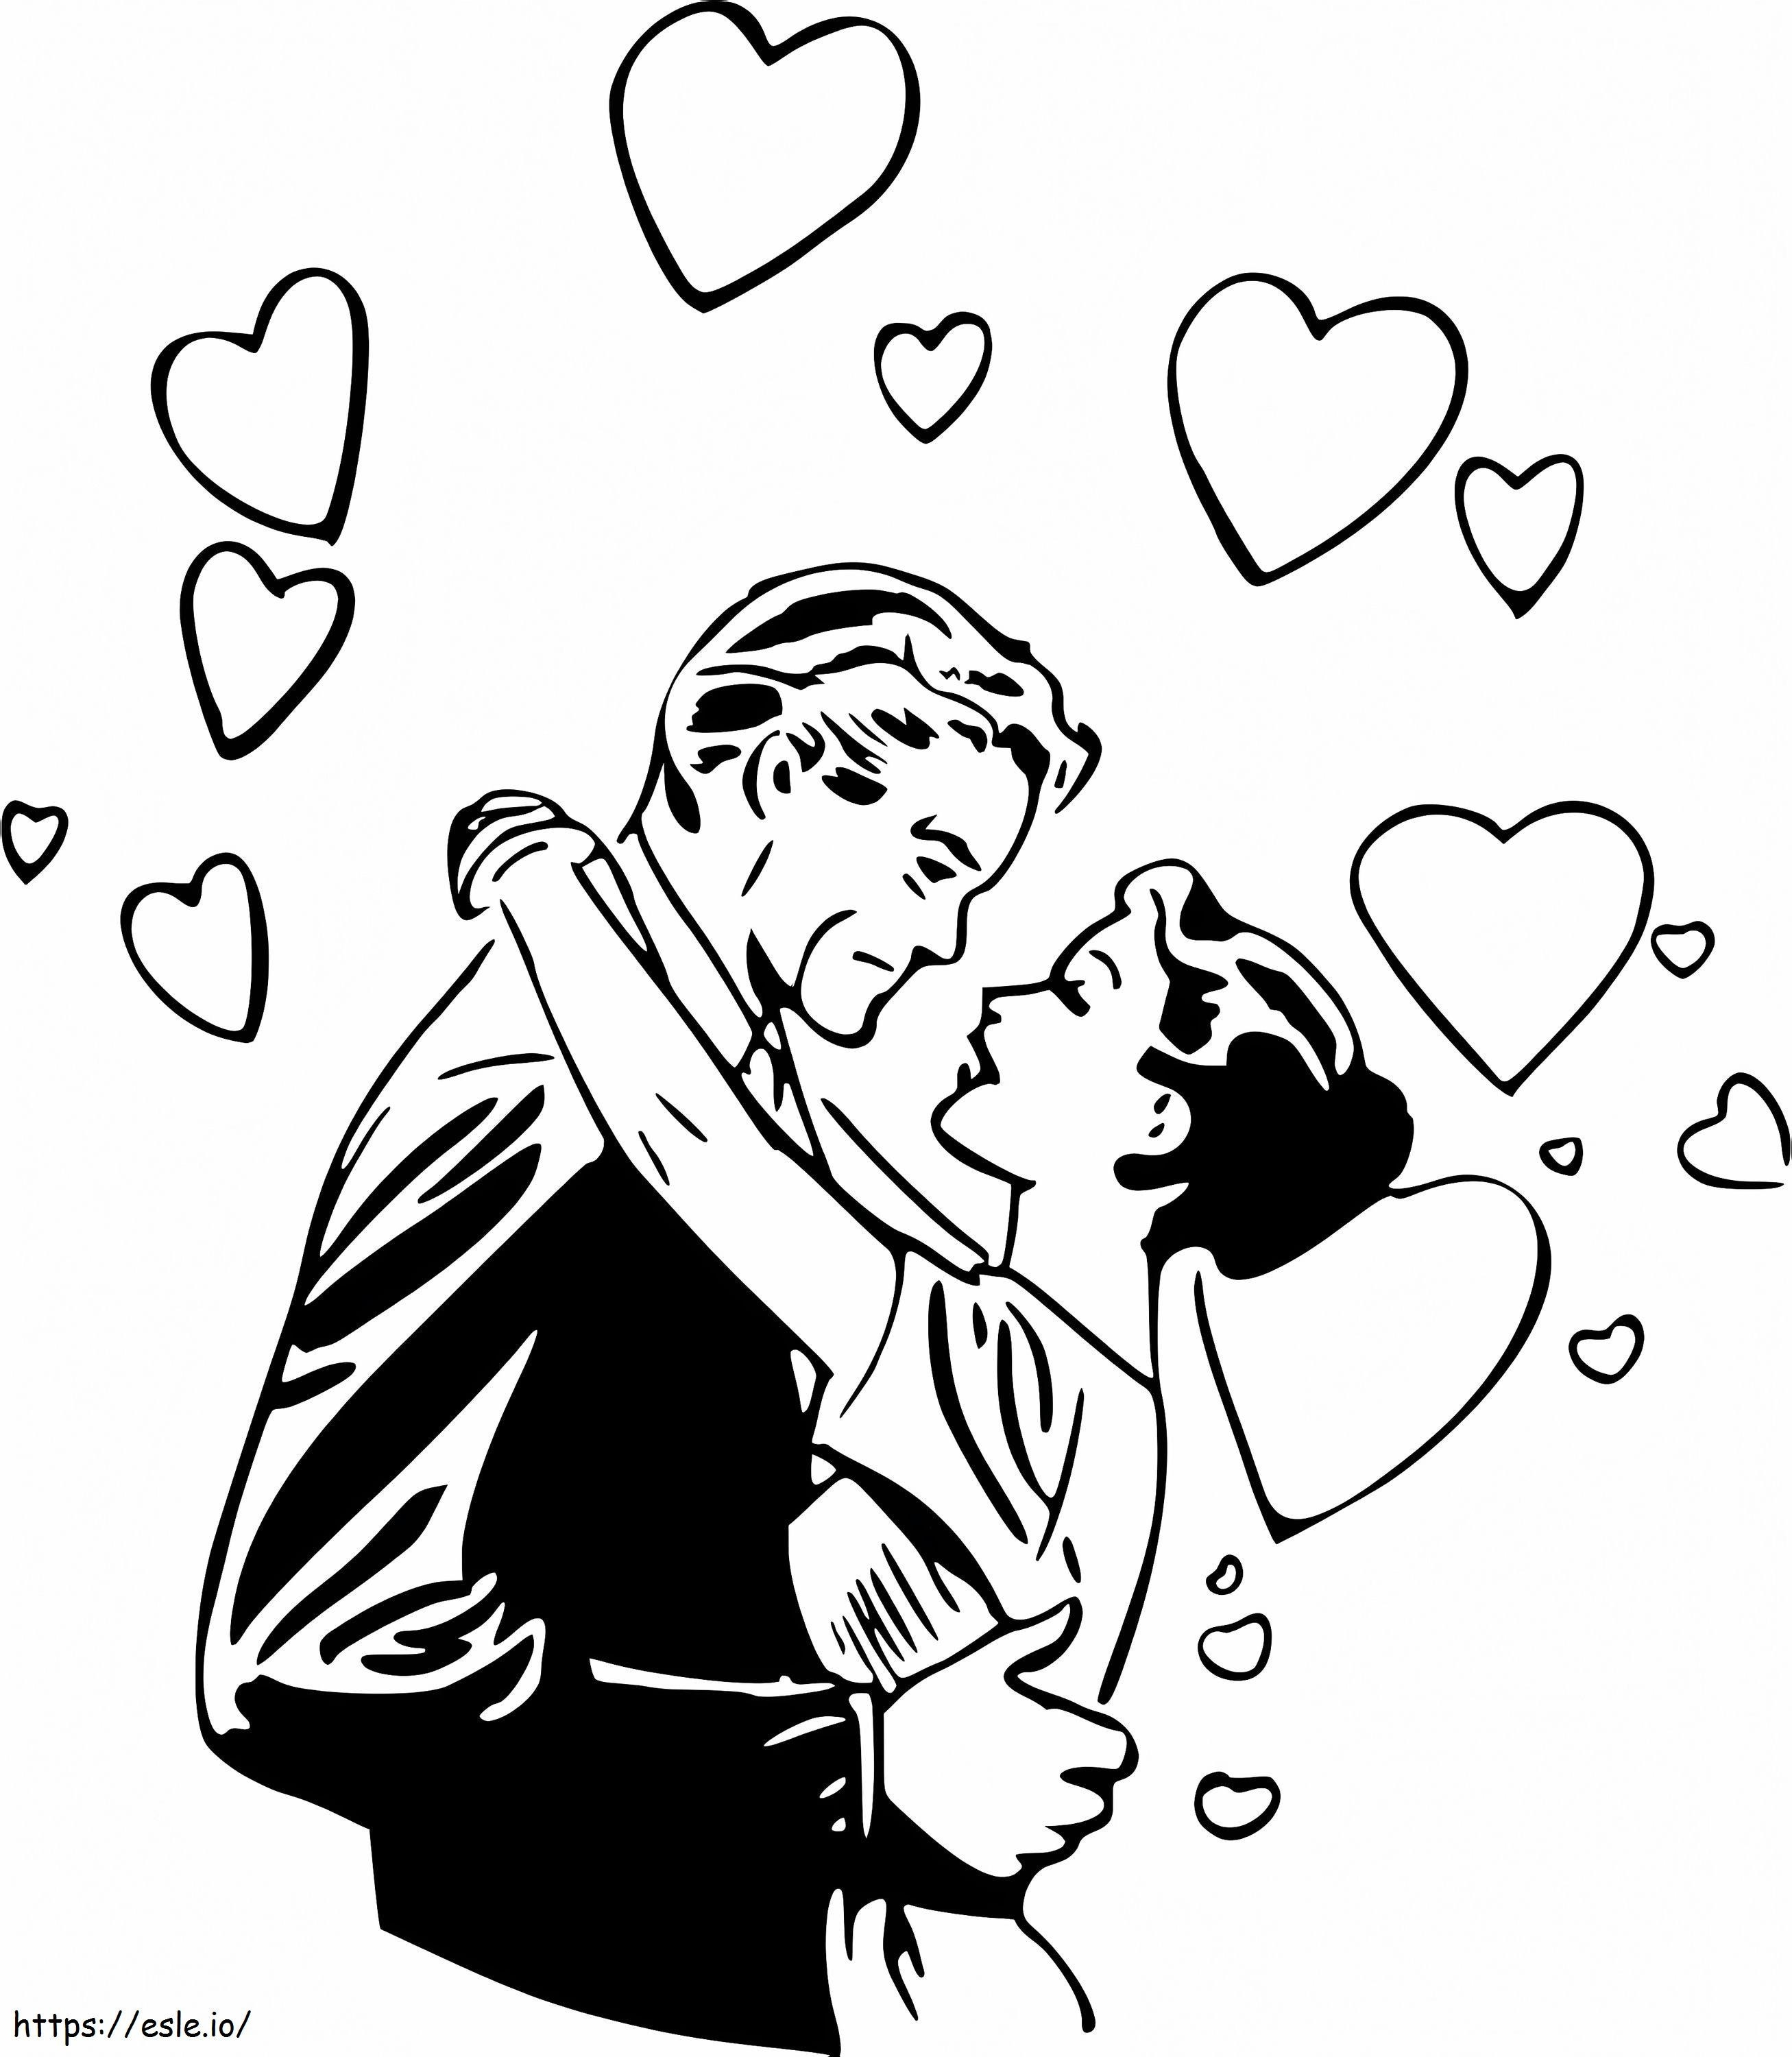 Vintage Couple In Love coloring page